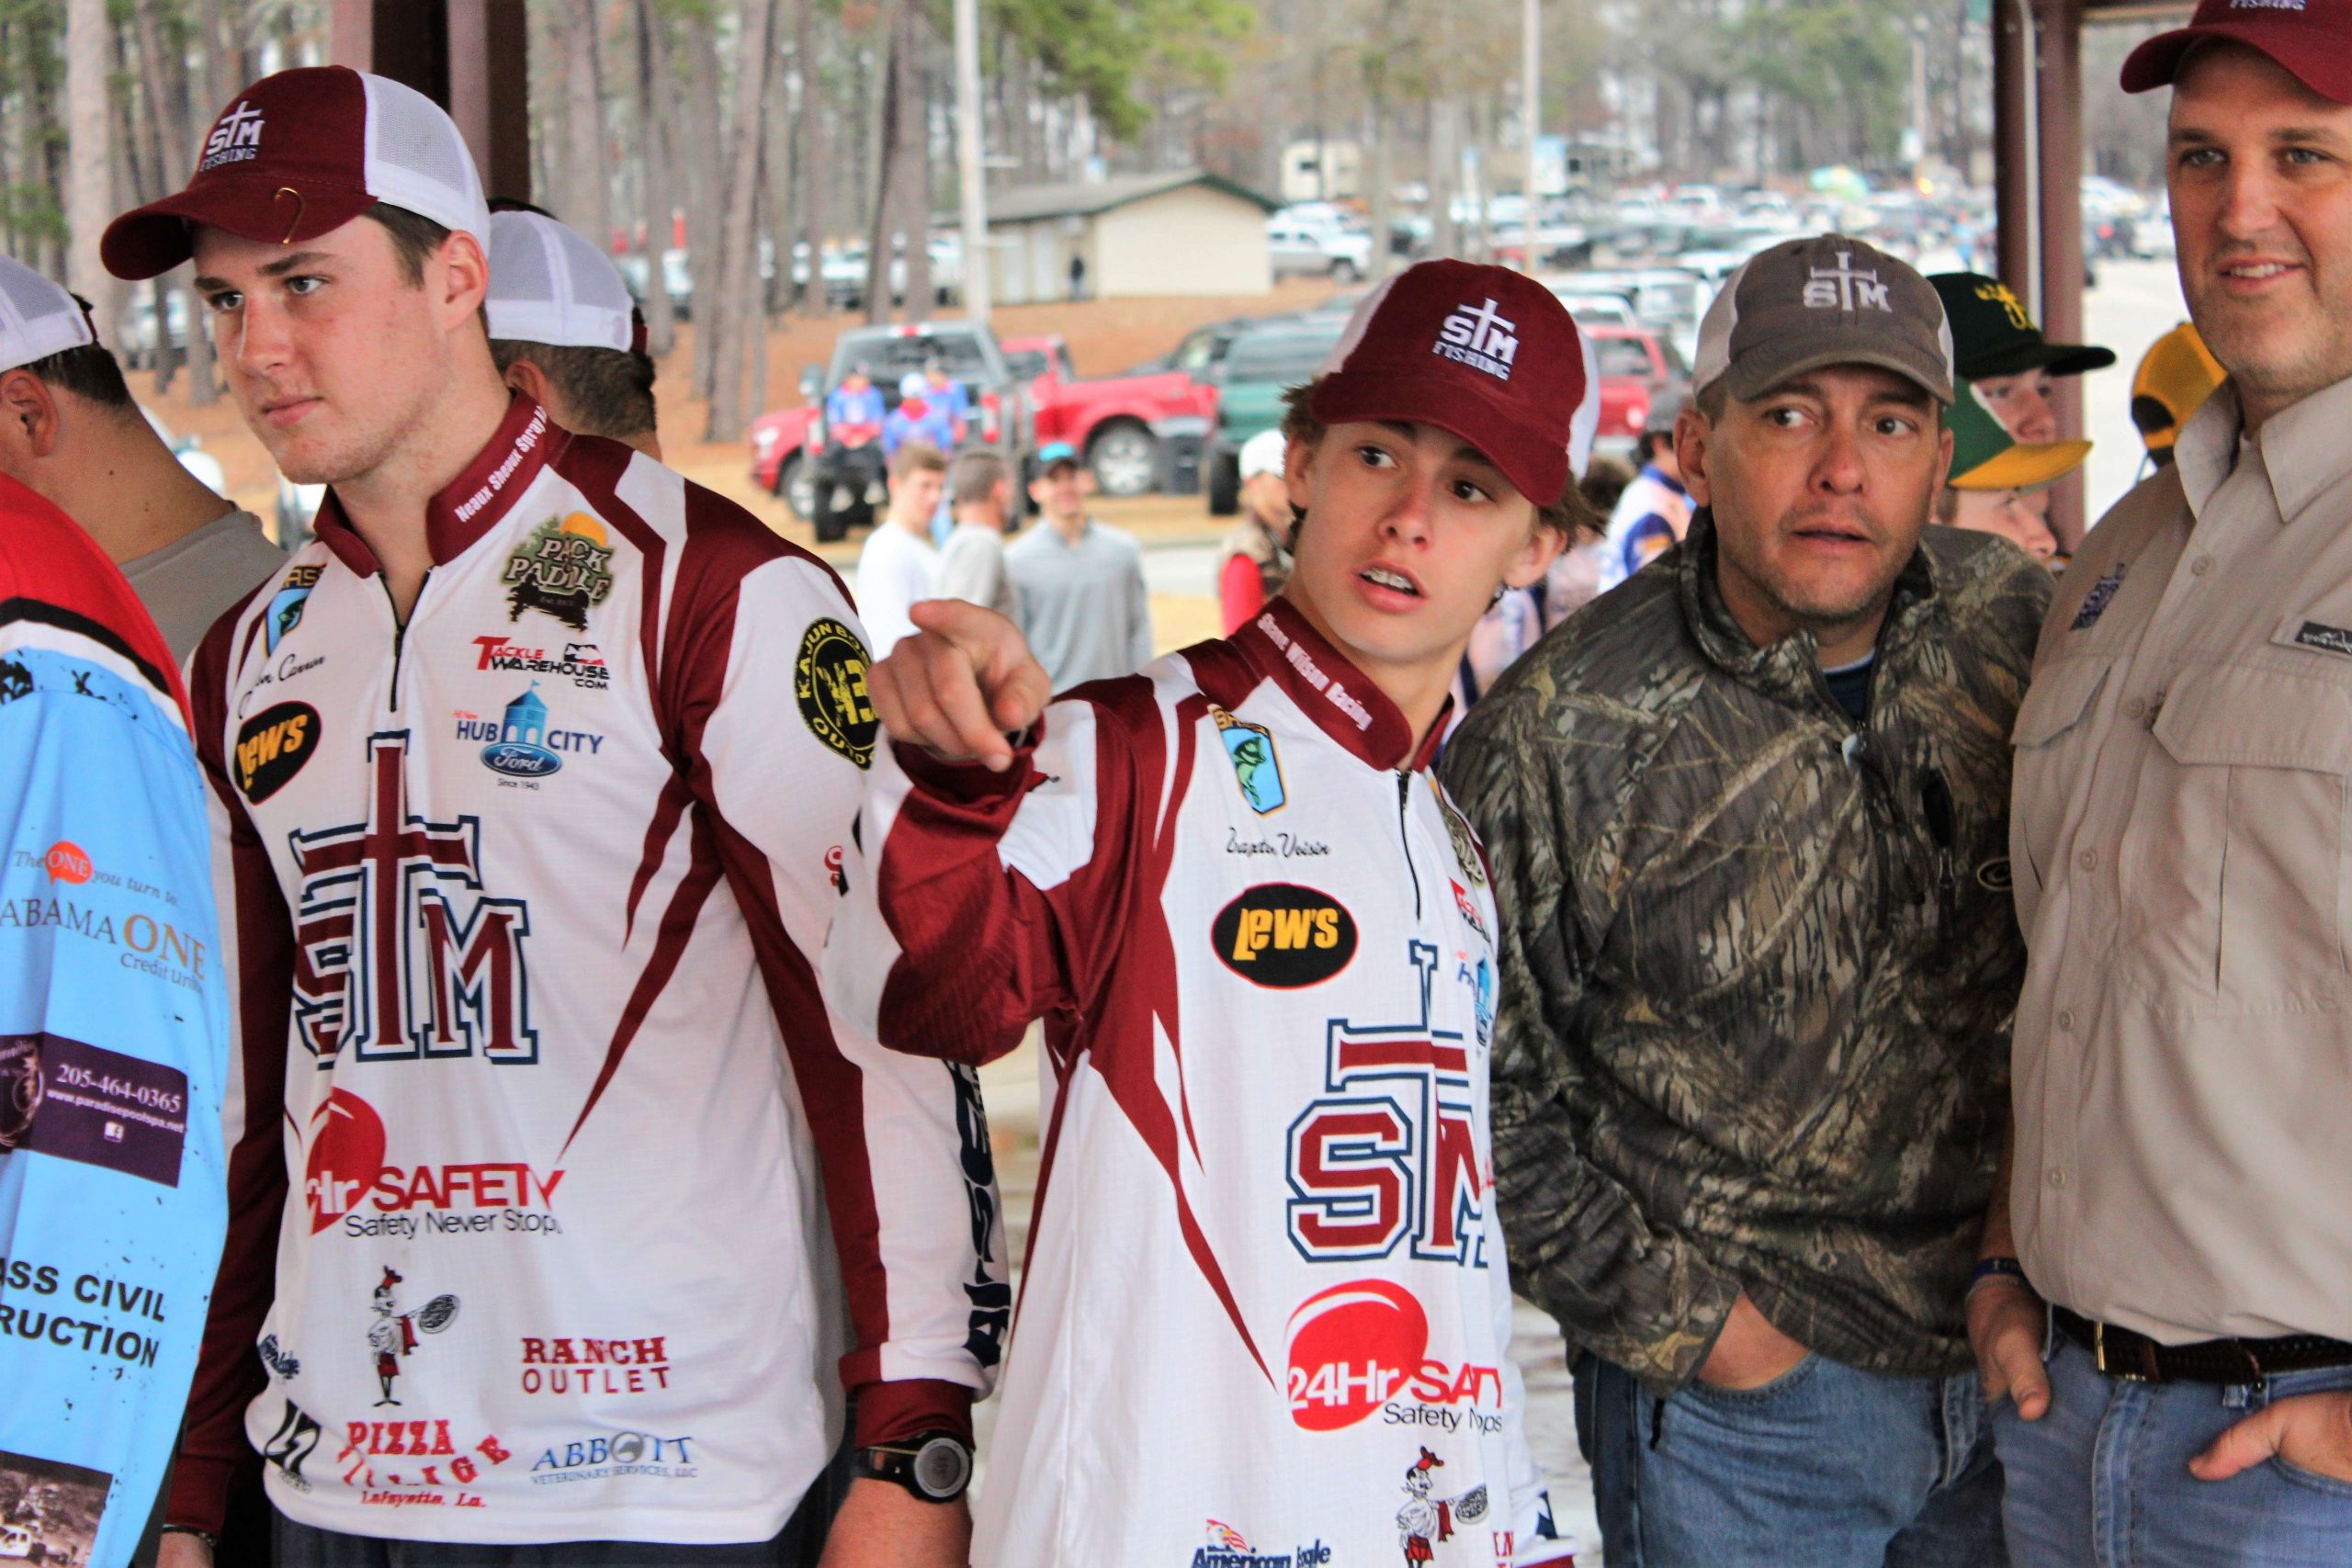 All signs point to a terrific day of action when the Mossy Oak Bassmaster High School Central Open presented by DICKâS Sporting Goods begins Sunday at 7 a.m. Weigh-in is set for 3 p.m.